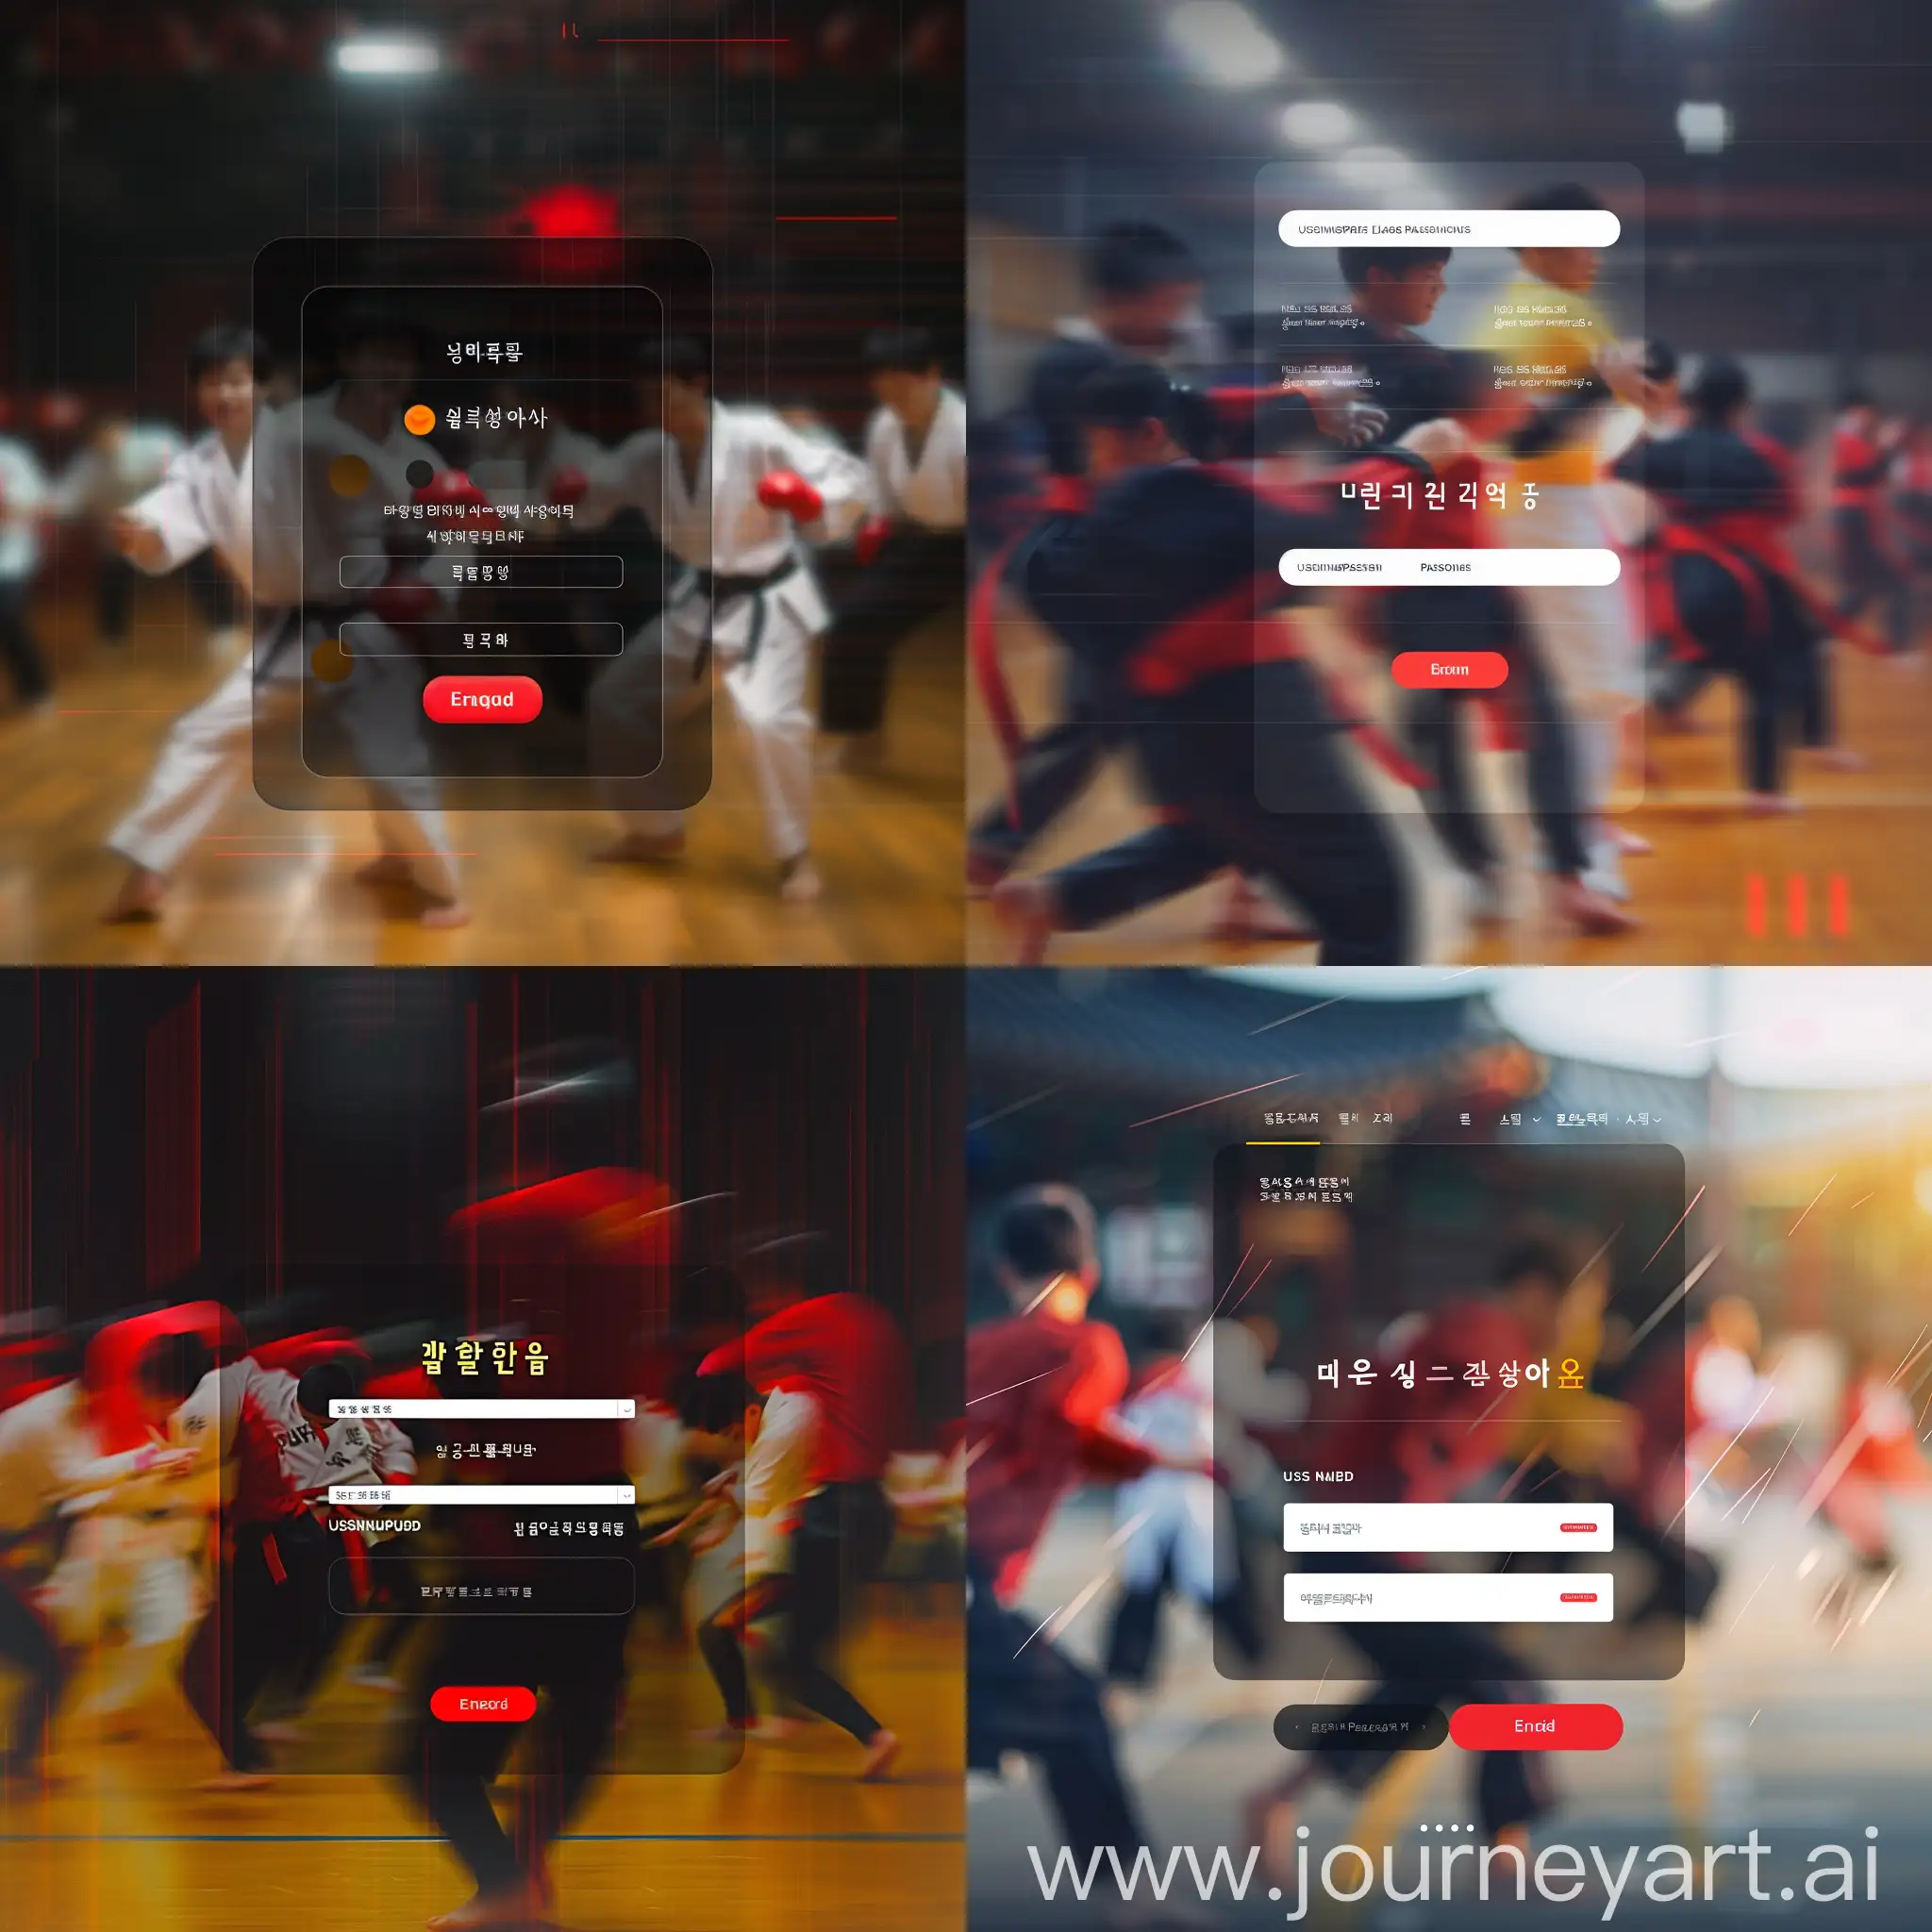 WEBSITE LOGIN PAGE DESIGN Picture a dynamic background featuring a blurred image of students practicing Korean martial arts forms. Overlayed on this background is a text logo with a dynamic font, perhaps in red or yellow, contrasting with the background's movement. A semi-transparent black panel with rounded edges appears in the center, housing the login form. White text labels for "Username" and "Password" are placed above slightly transparent text fields that have a subtle glow effect. A red button with rounded edges and white text reading "Enter" sits below the form. This design evokes a sense of energy and action. resolution full hd